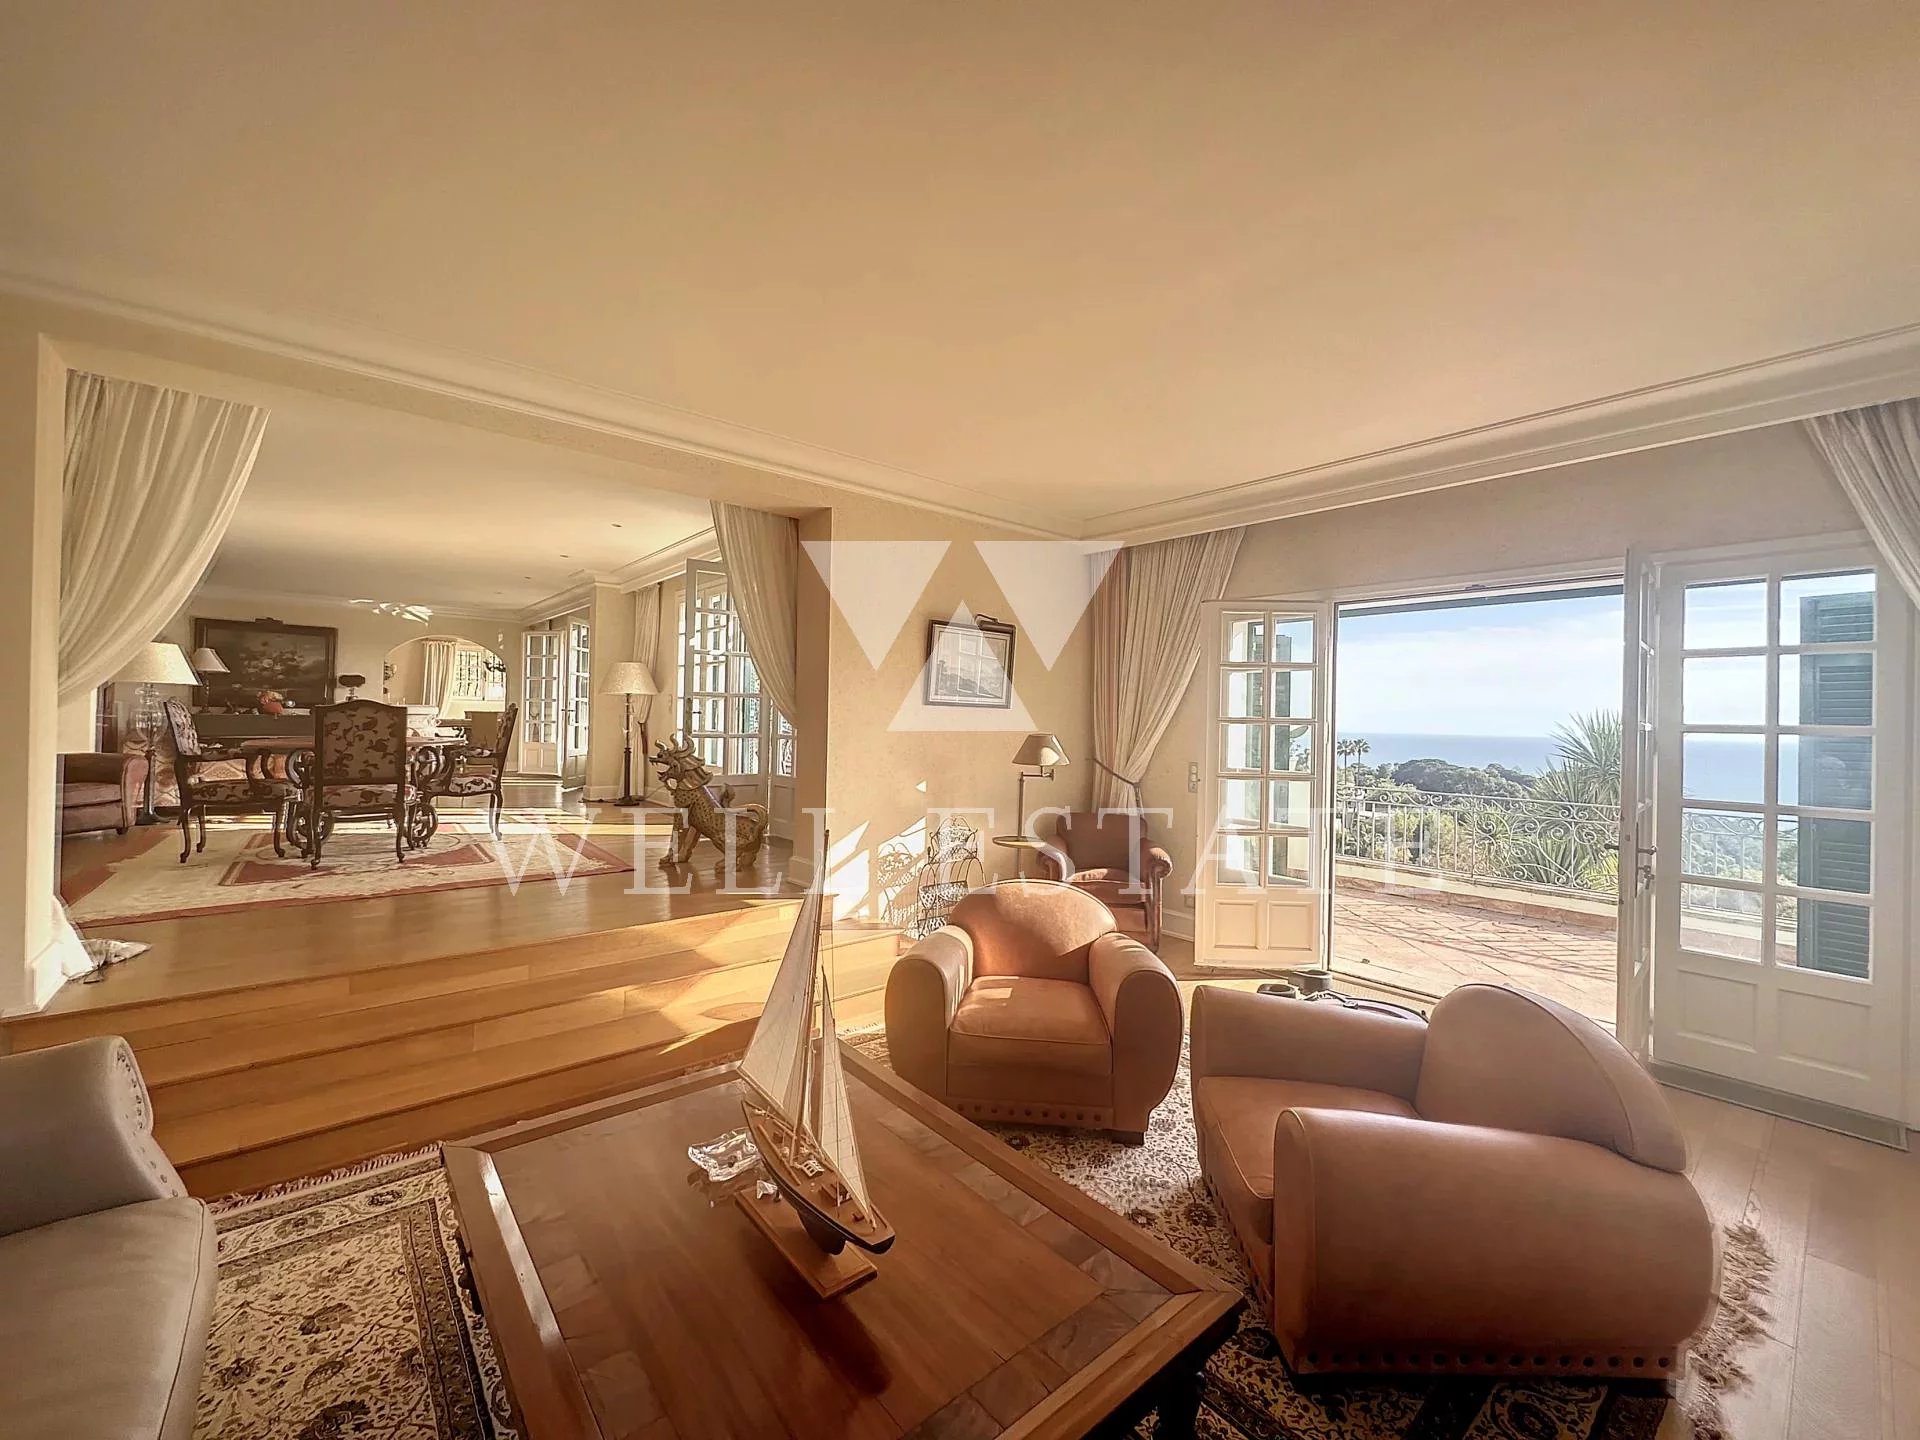 CANNES: Six-bedroom house (400 sqm) for sale